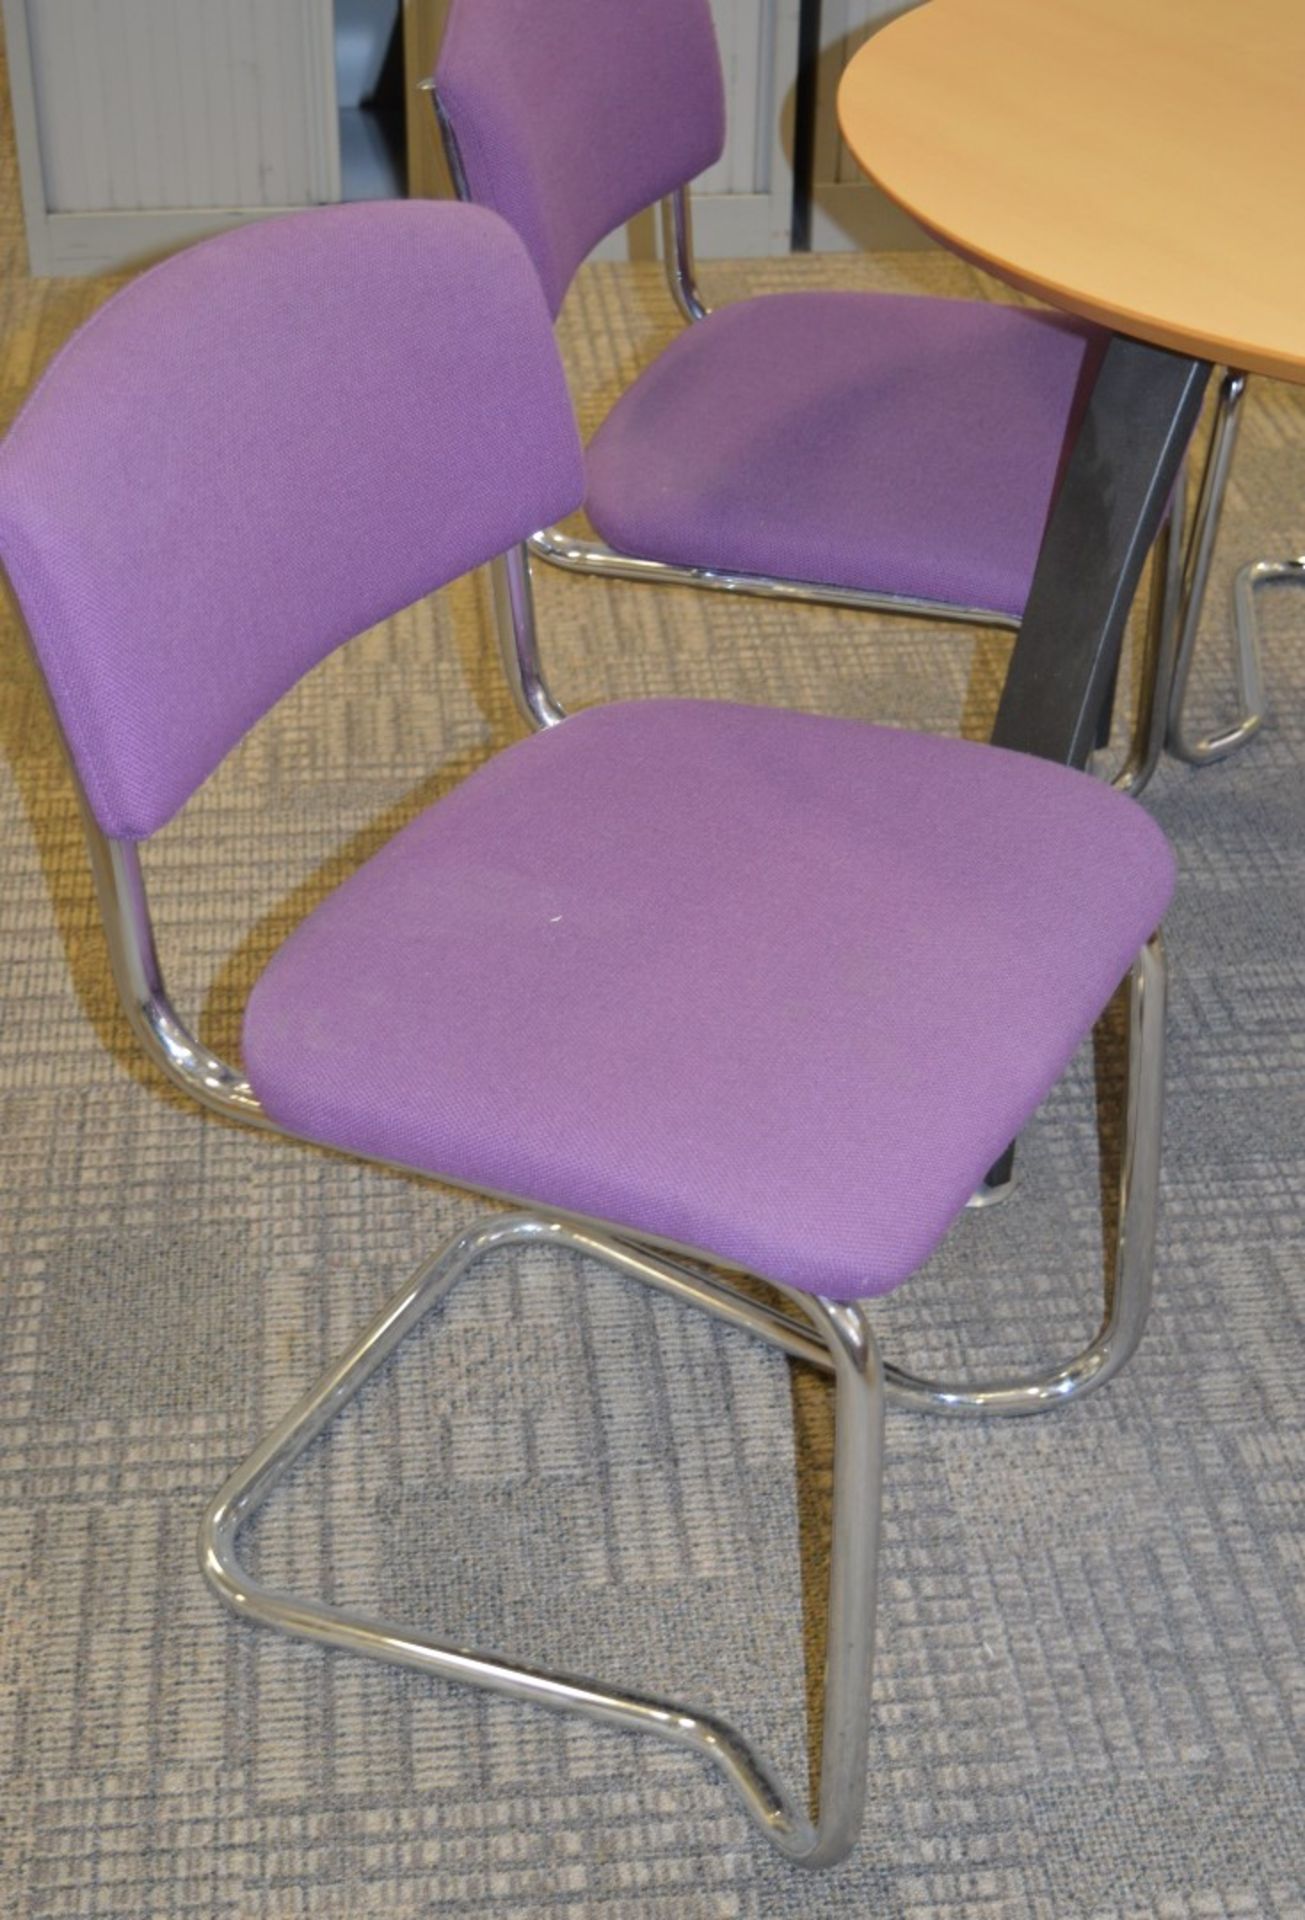 4 x Office Stacking Chairs - Purple Fabric With Chrome Base - CL106 - Good Condition - Location: - Image 4 of 4